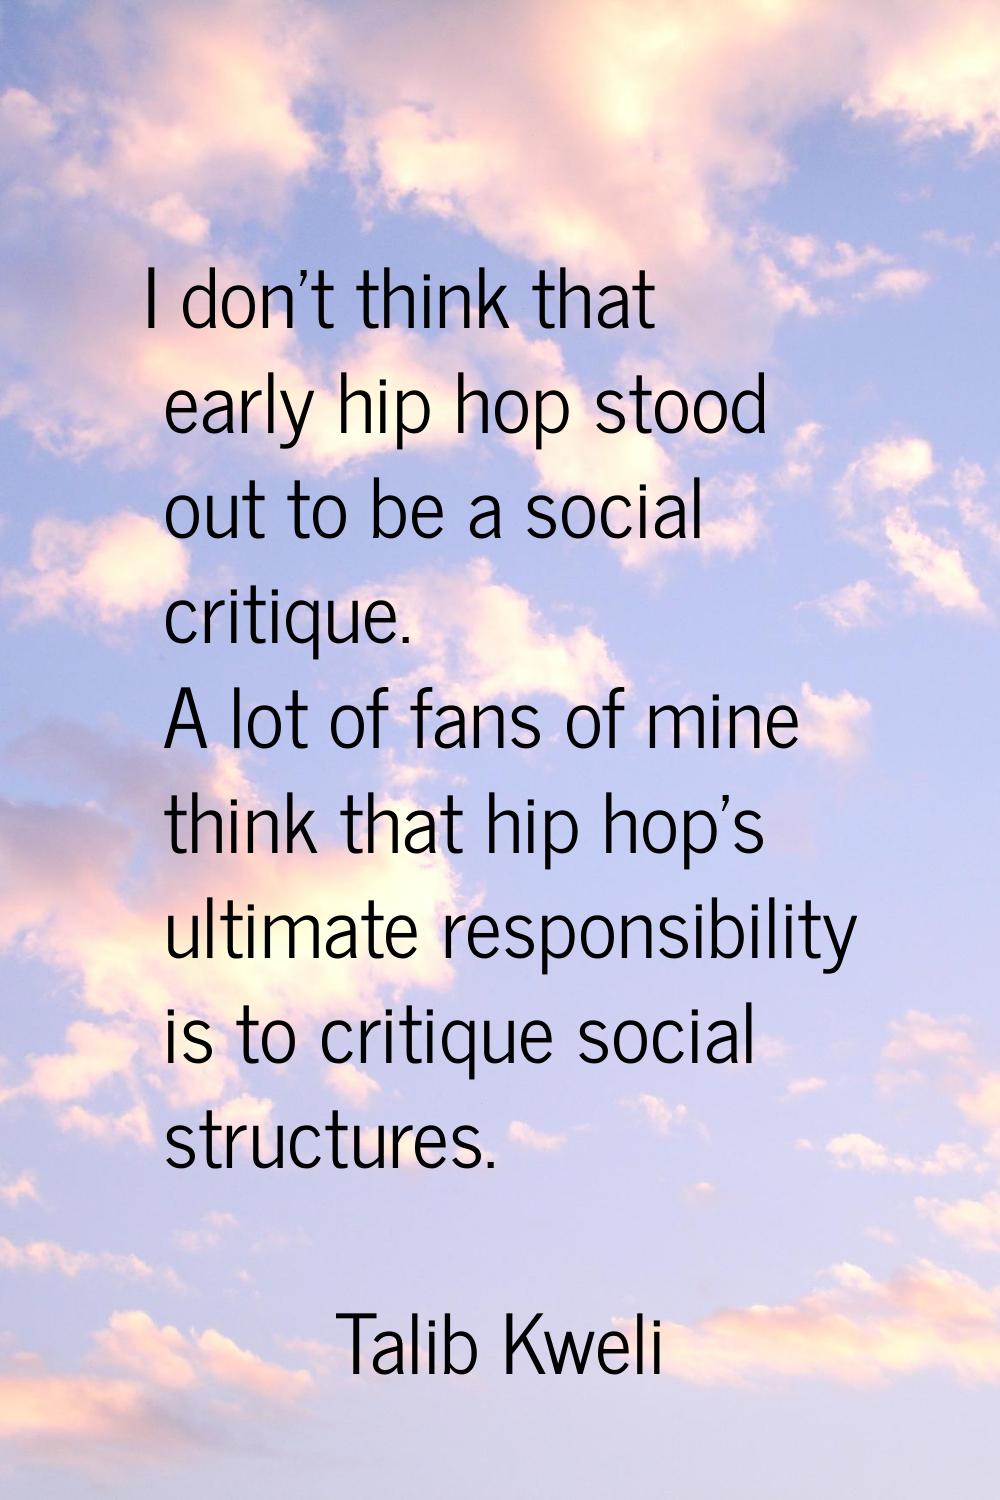 I don't think that early hip hop stood out to be a social critique. A lot of fans of mine think tha